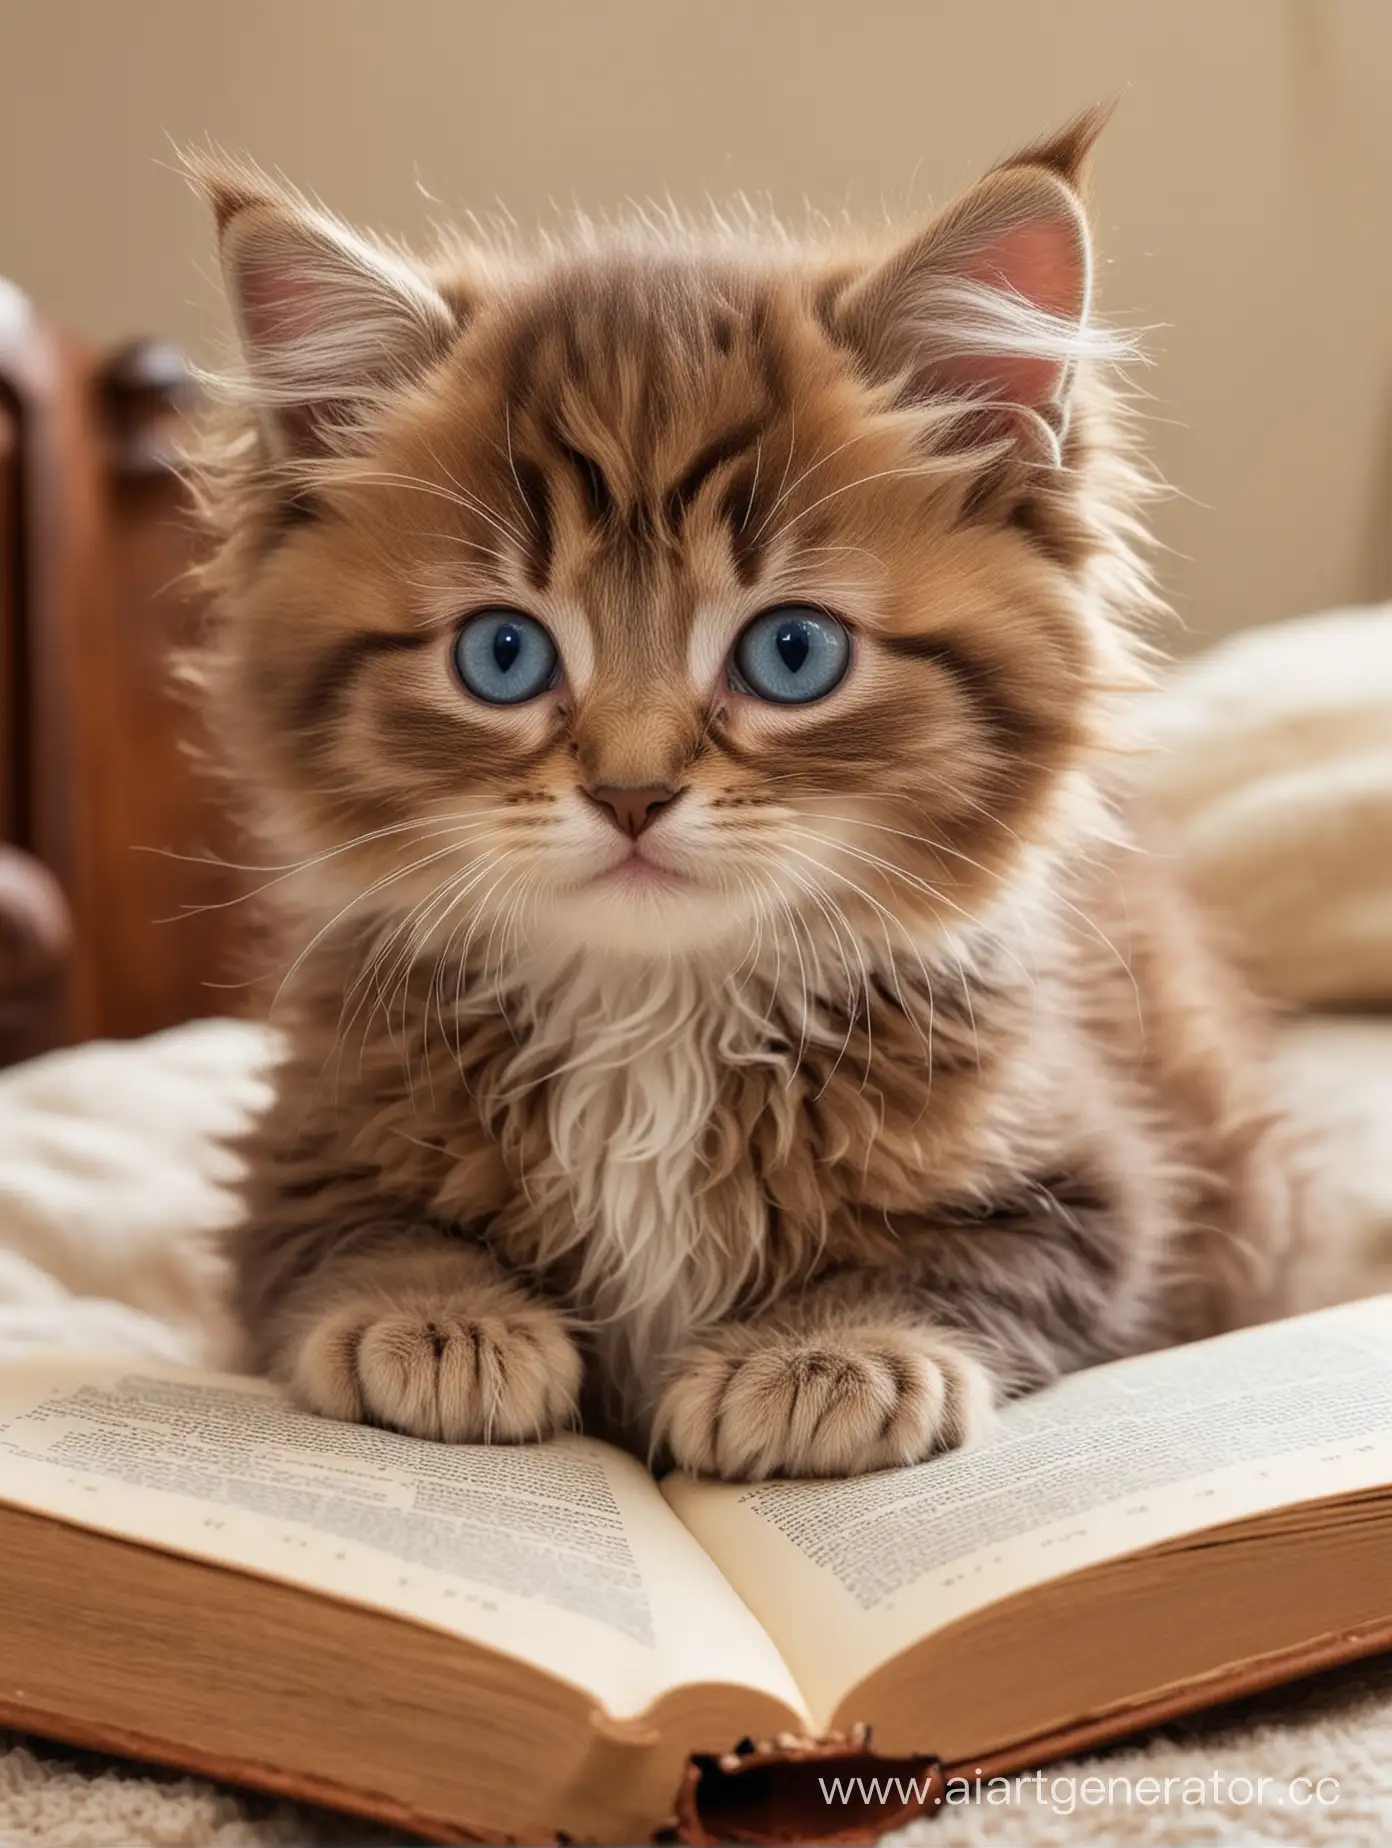 Fluffy-BlueEyed-Kitten-Reading-The-Lord-of-the-Rings-on-a-Bed